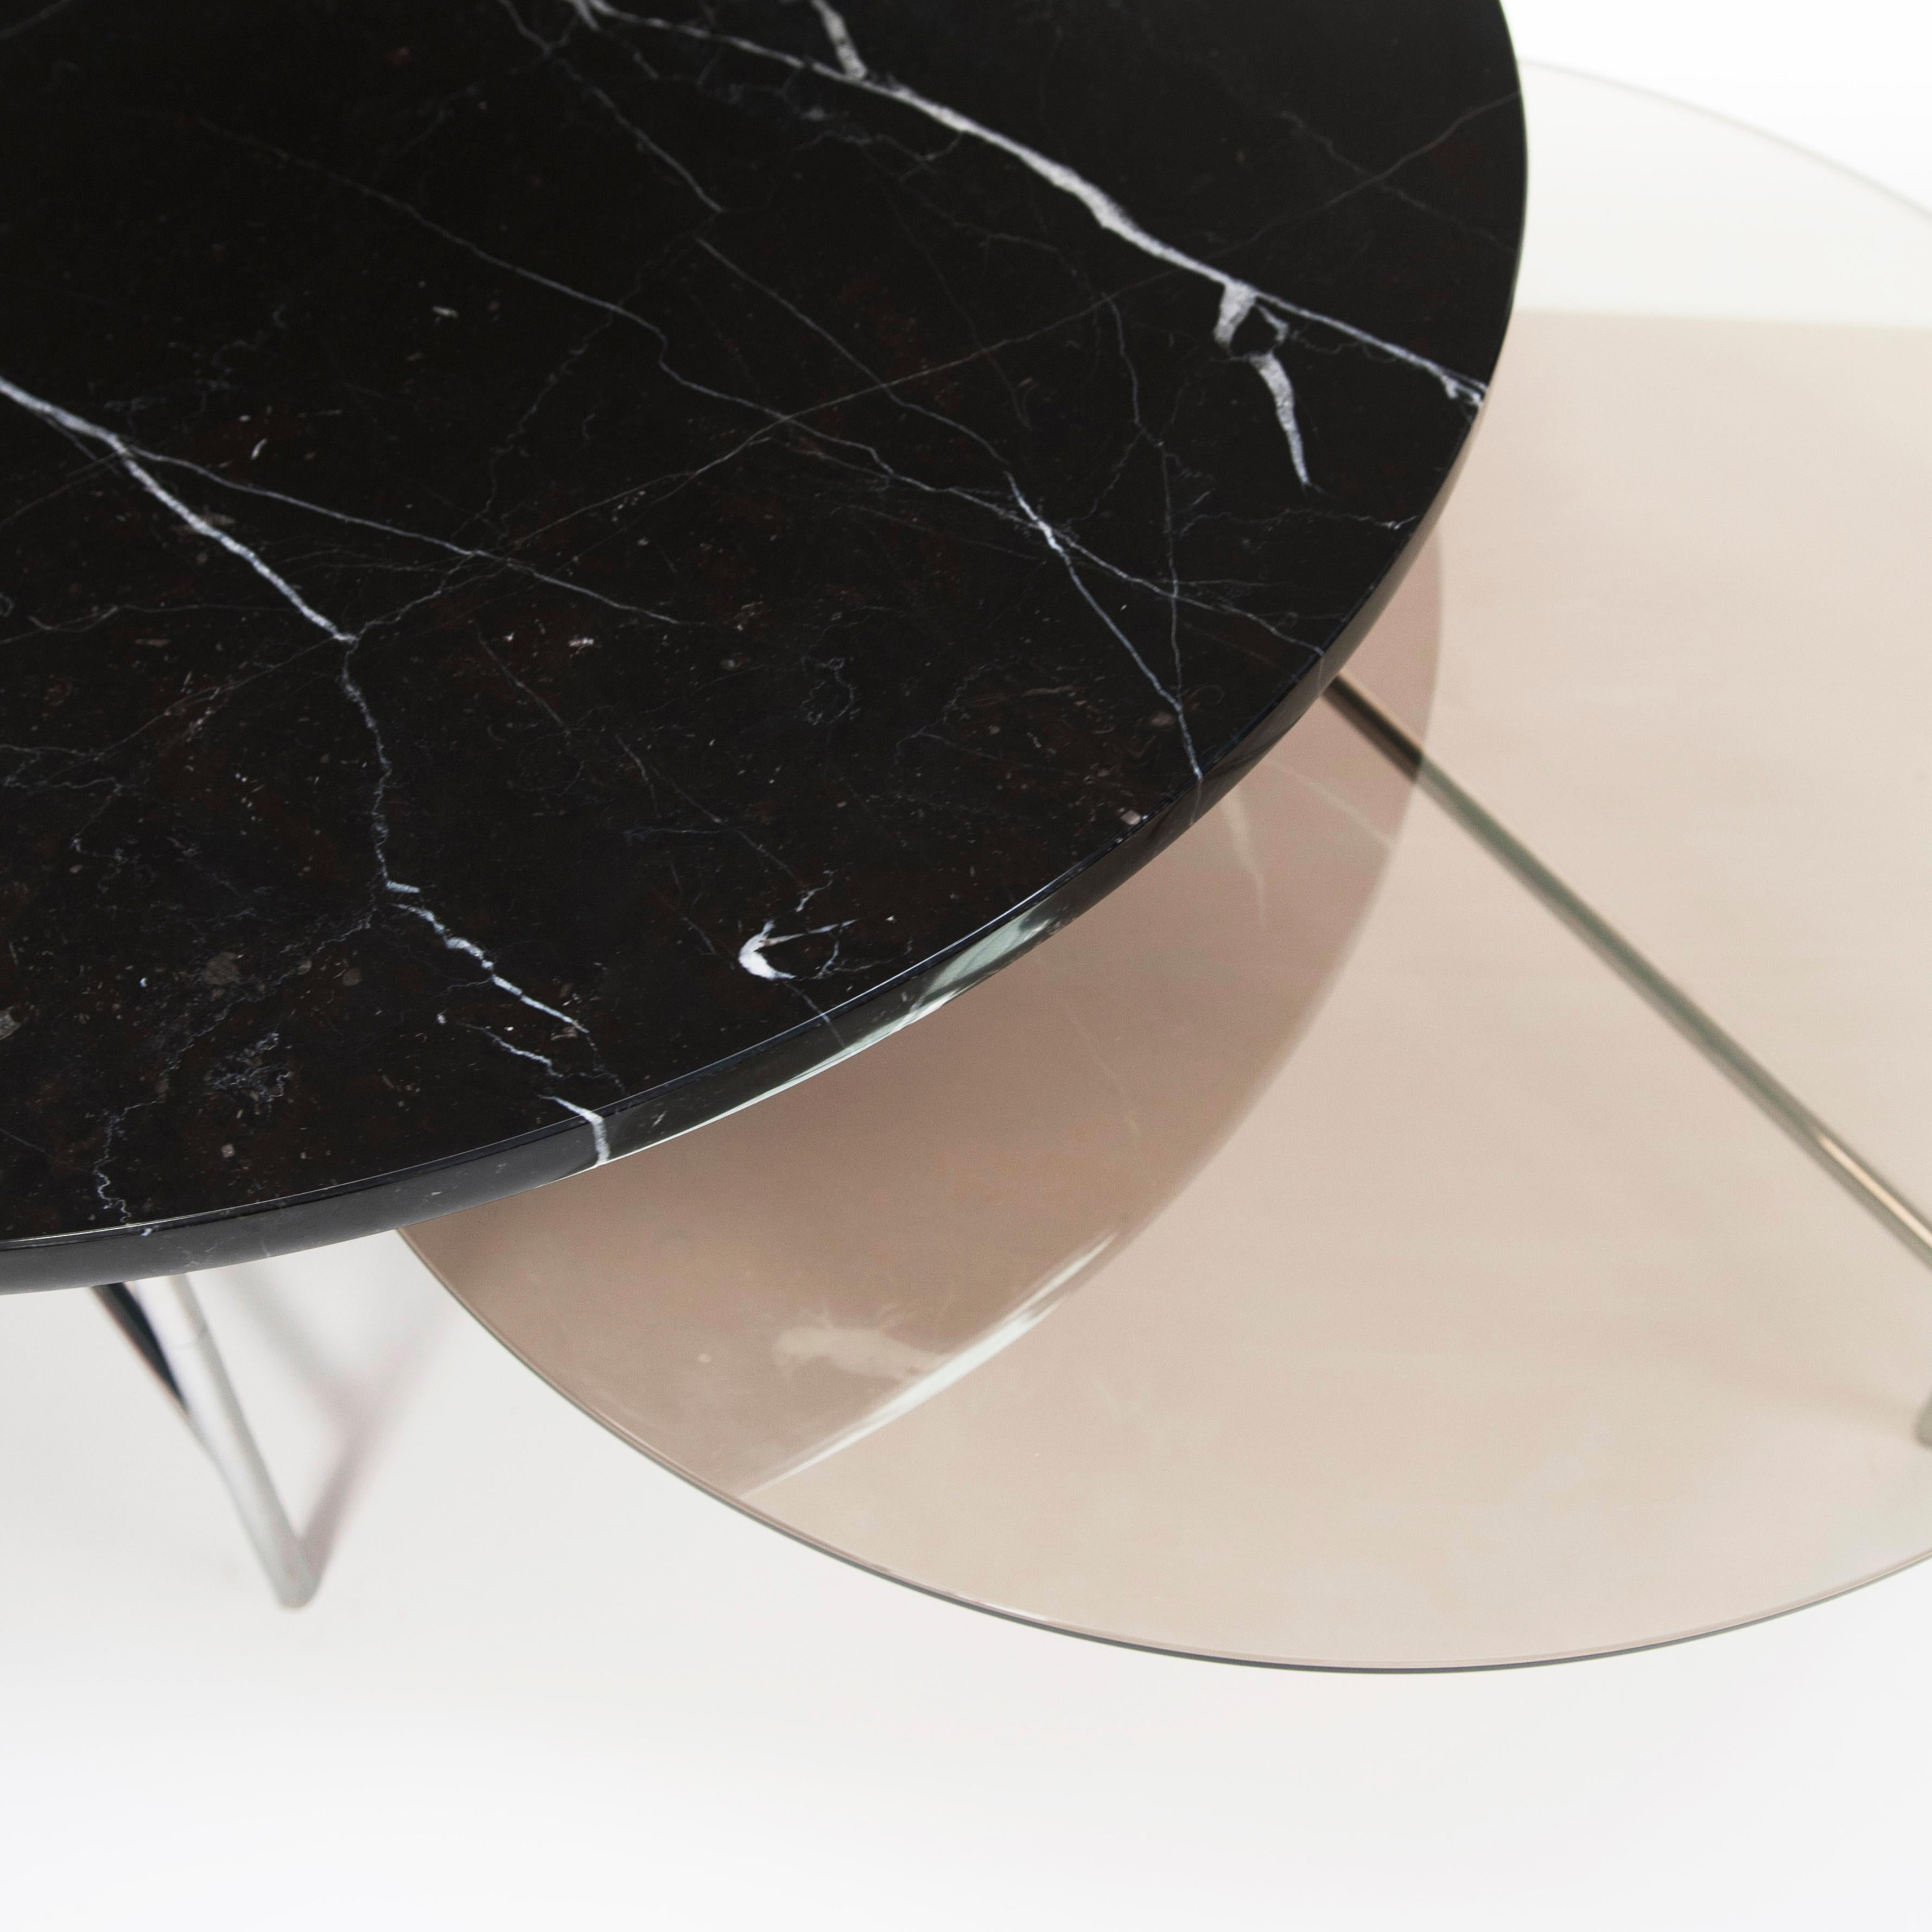 Zorro is a minimalist yet graphical coffee table. The masked hero signature inspired the ingenious Z structure which supports a duo of overlapping round tabletops giving a sense of lightness to this simple and elegant
piece.
The design plays with